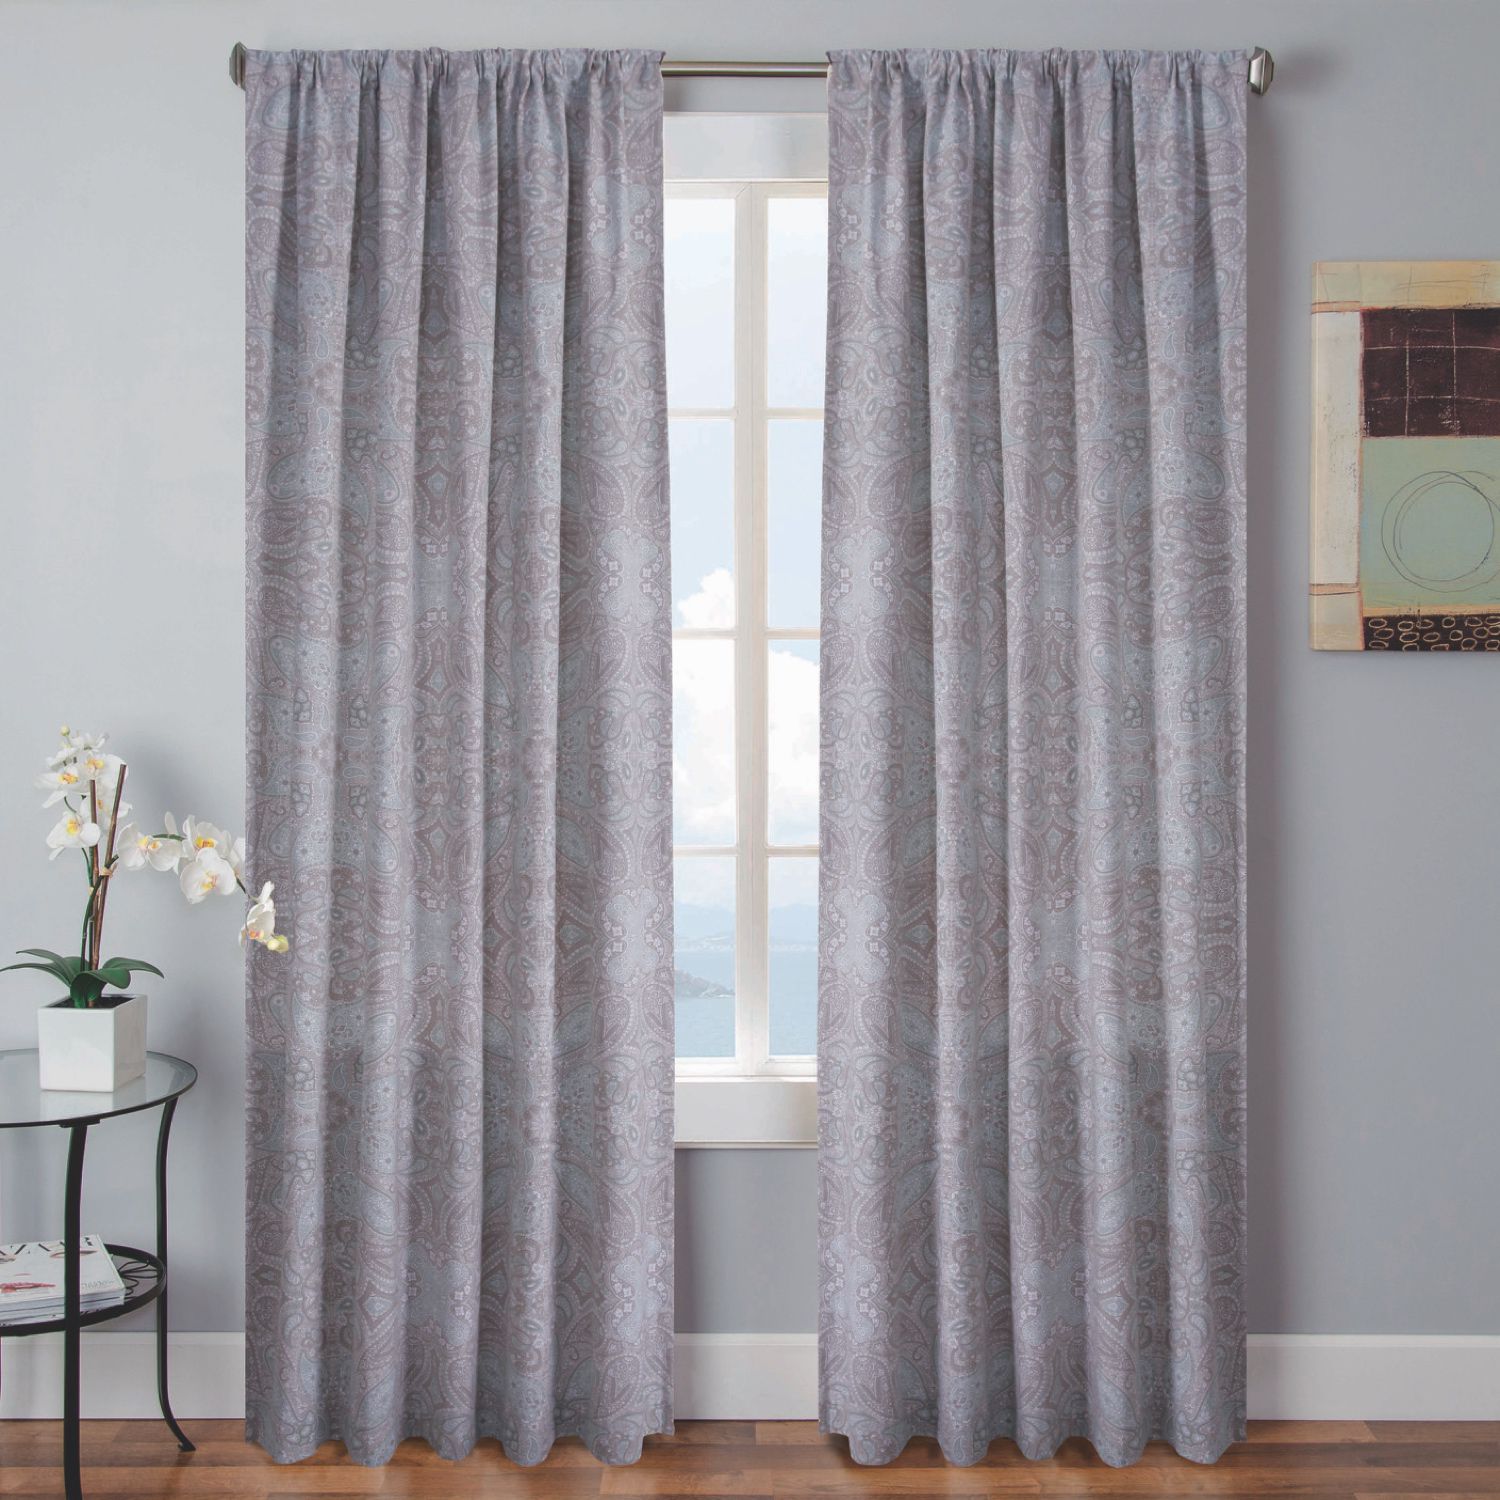 Image for Duck River Textile Laney Solid 2-pack Window Curtain Set at Kohl's.